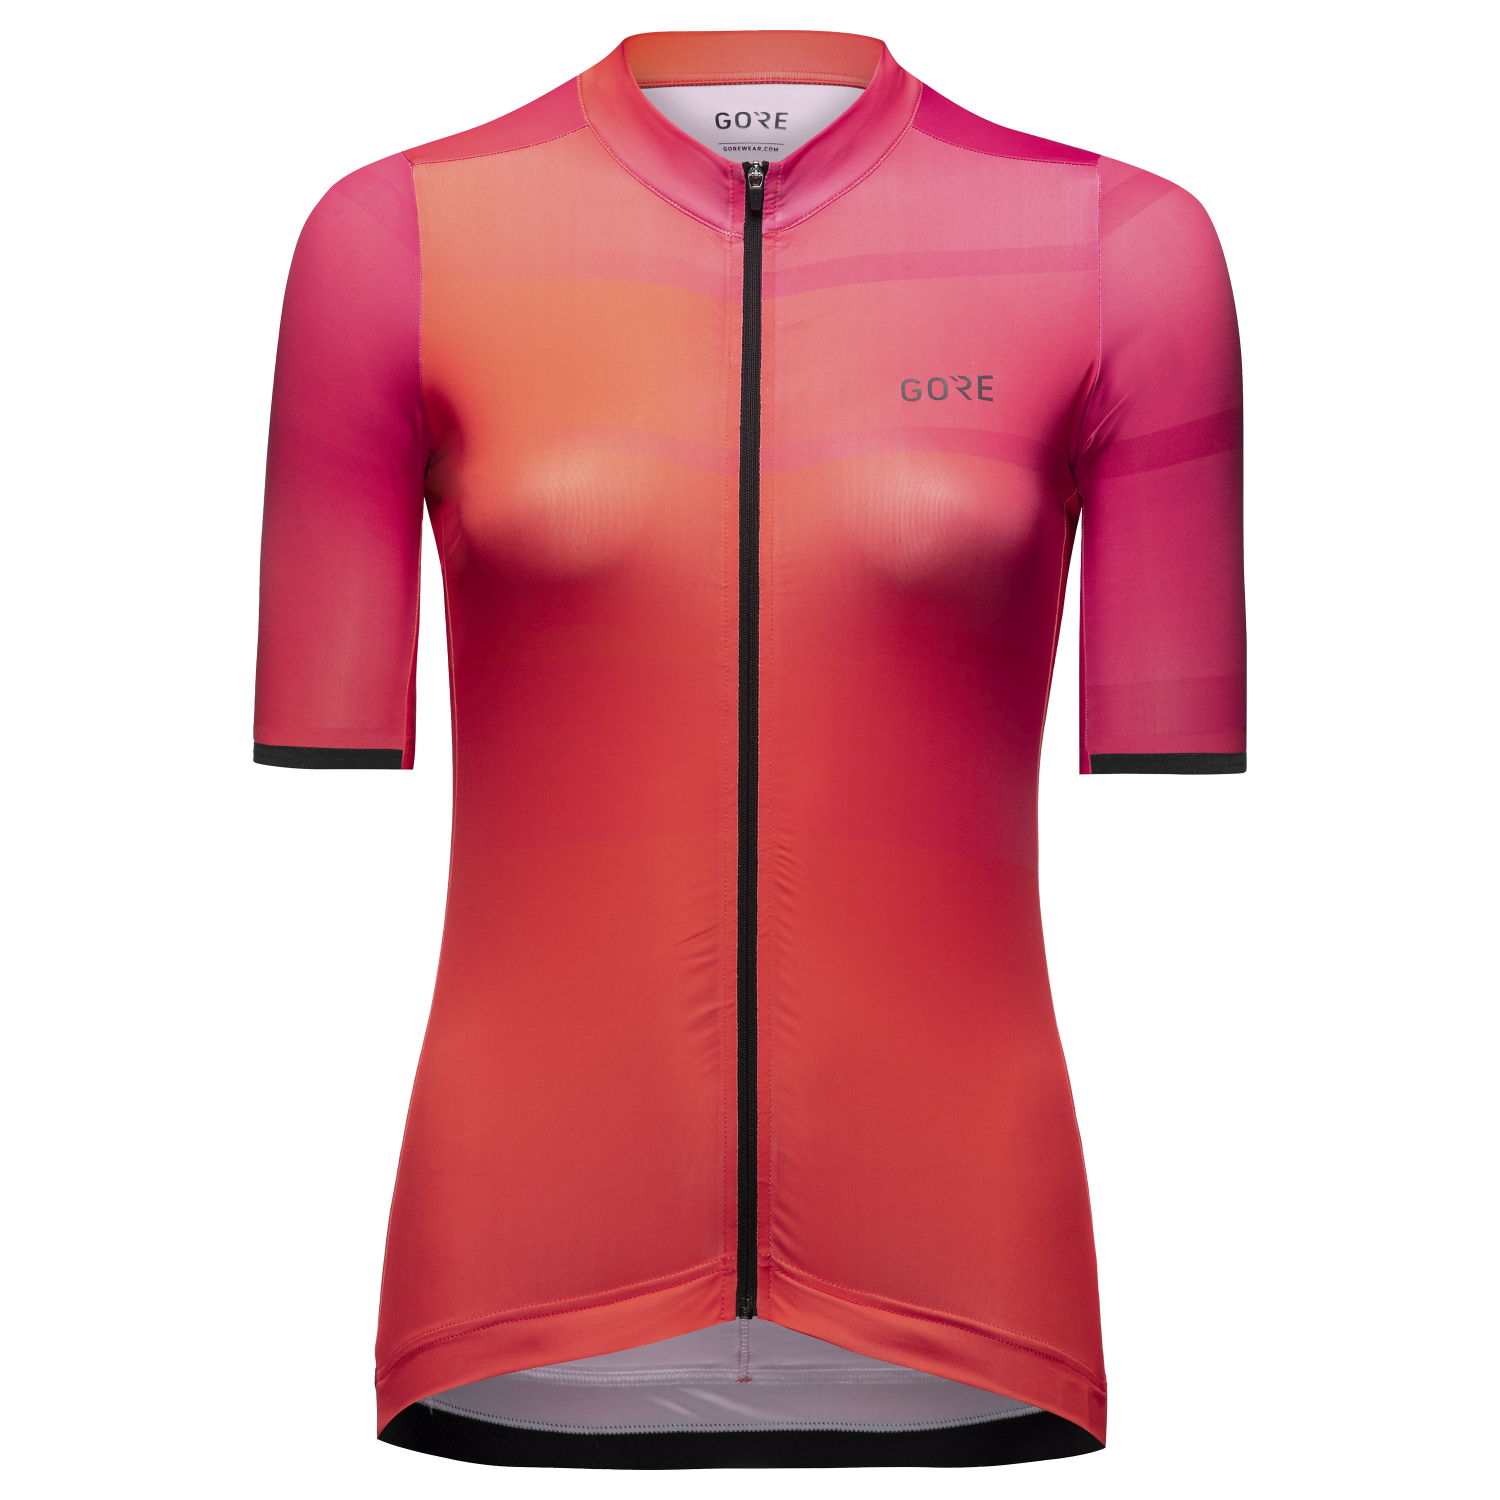 GOREWEAR Ardent Cycling Jersey Women's in Fireball/Process Pink | XS (0-2) | Form fit